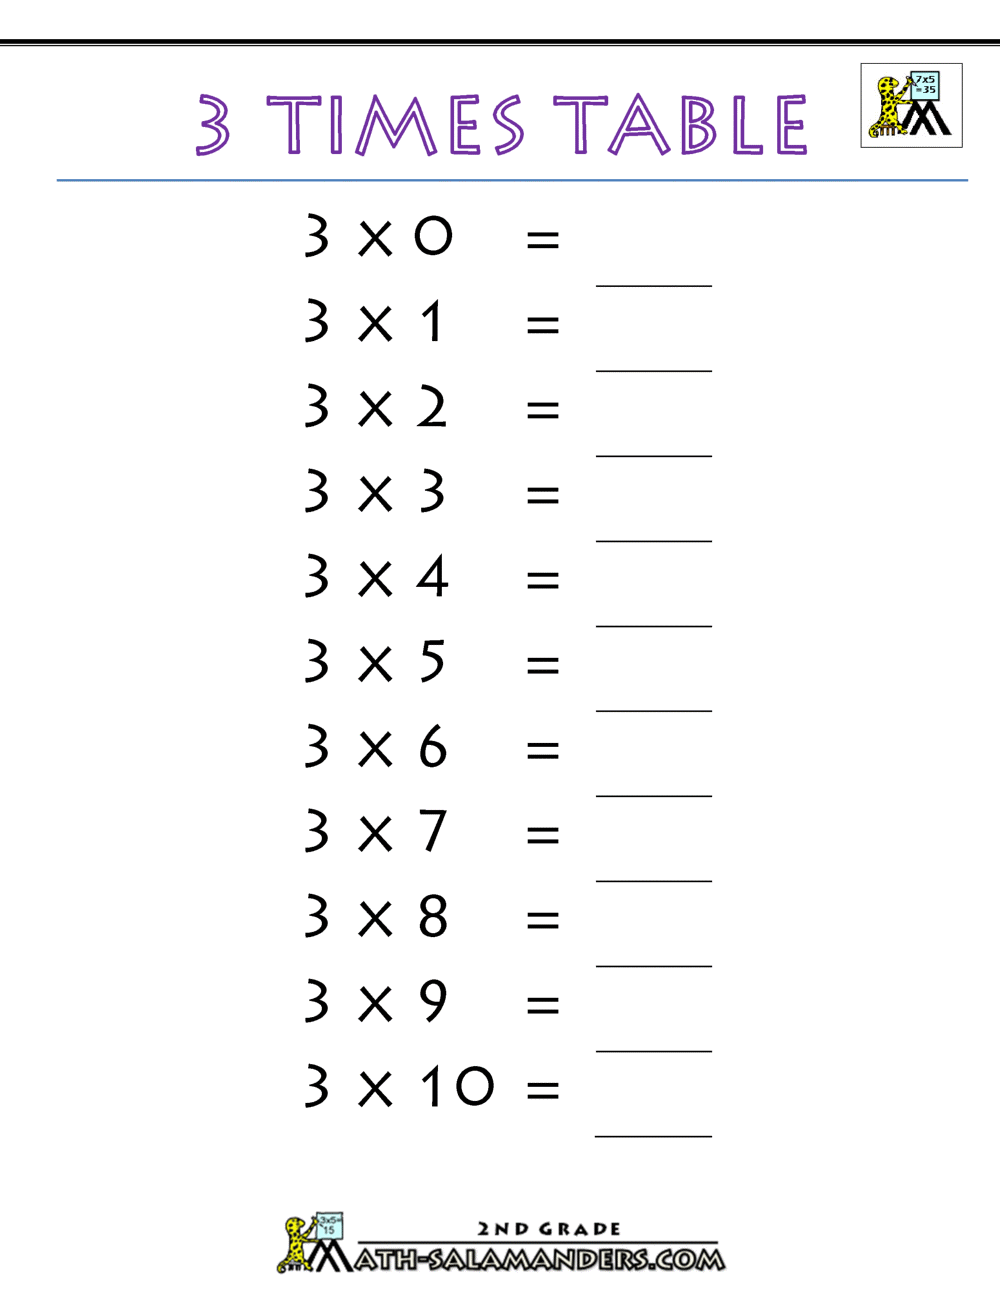 multiplication-table-2-and-3-worksheet-pdf-itsme-winchelle